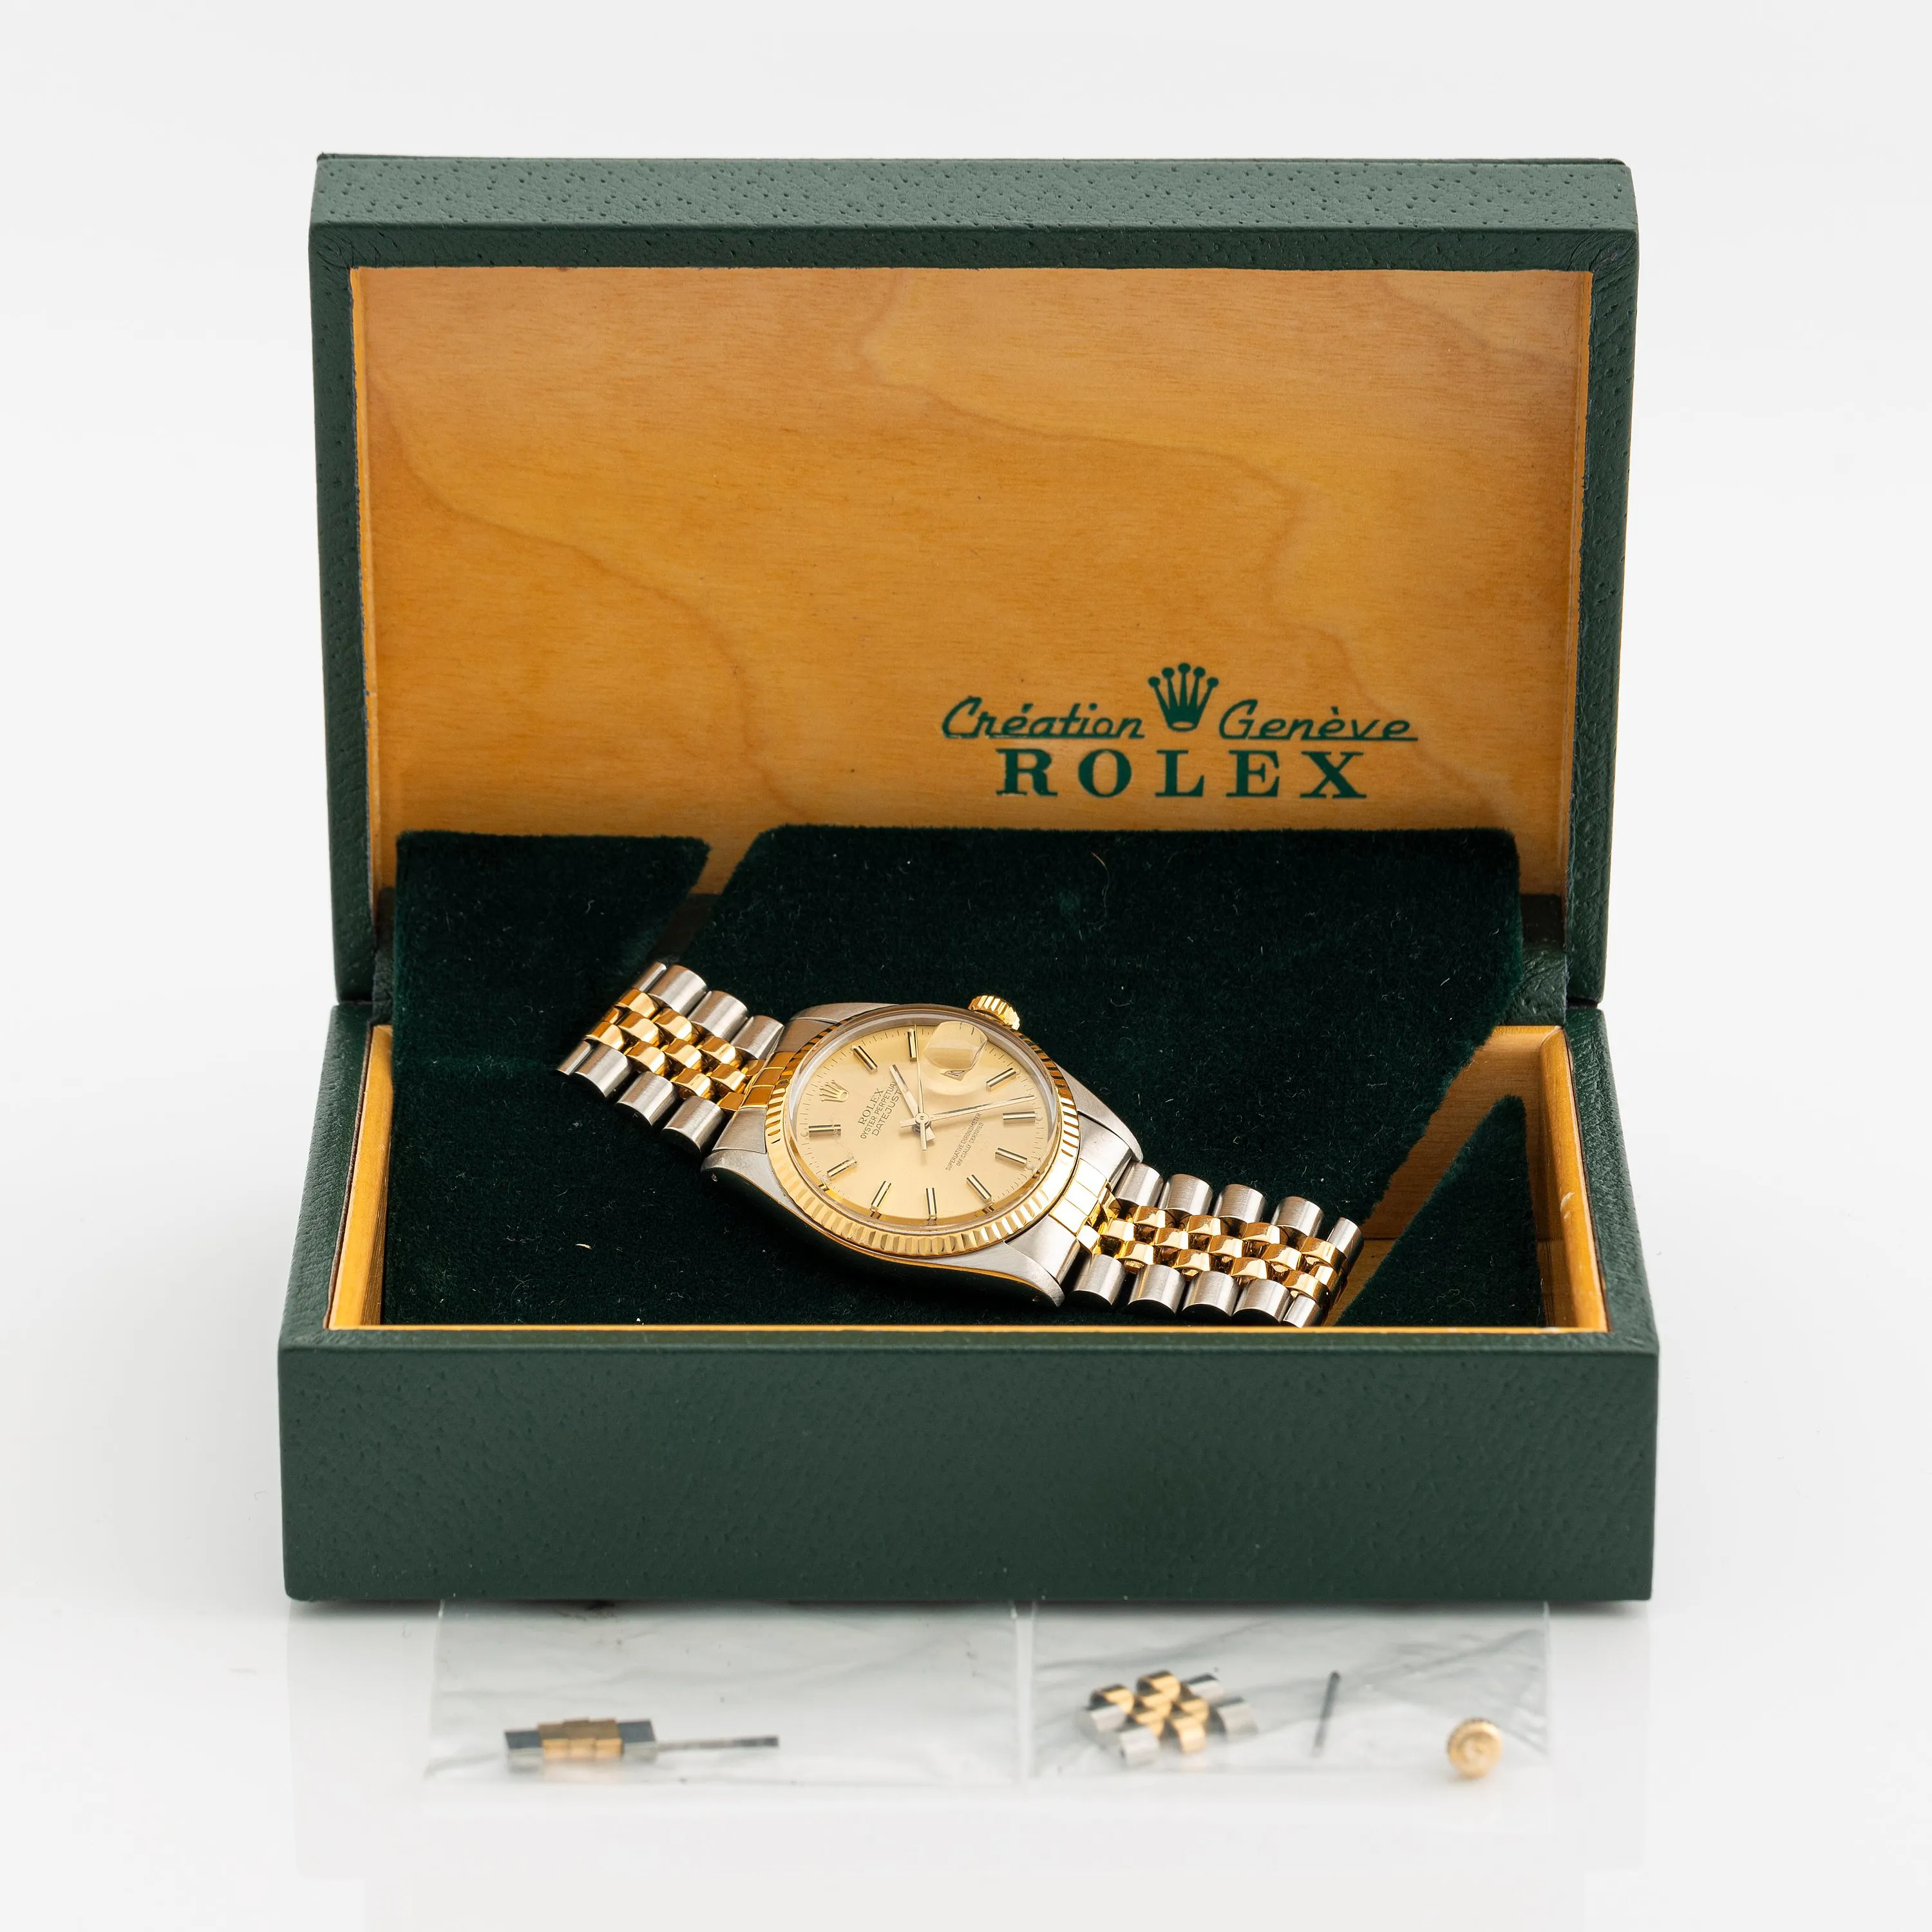 Rolex Datejust 16013 F 36mm Yellow gold and stainless steel 8